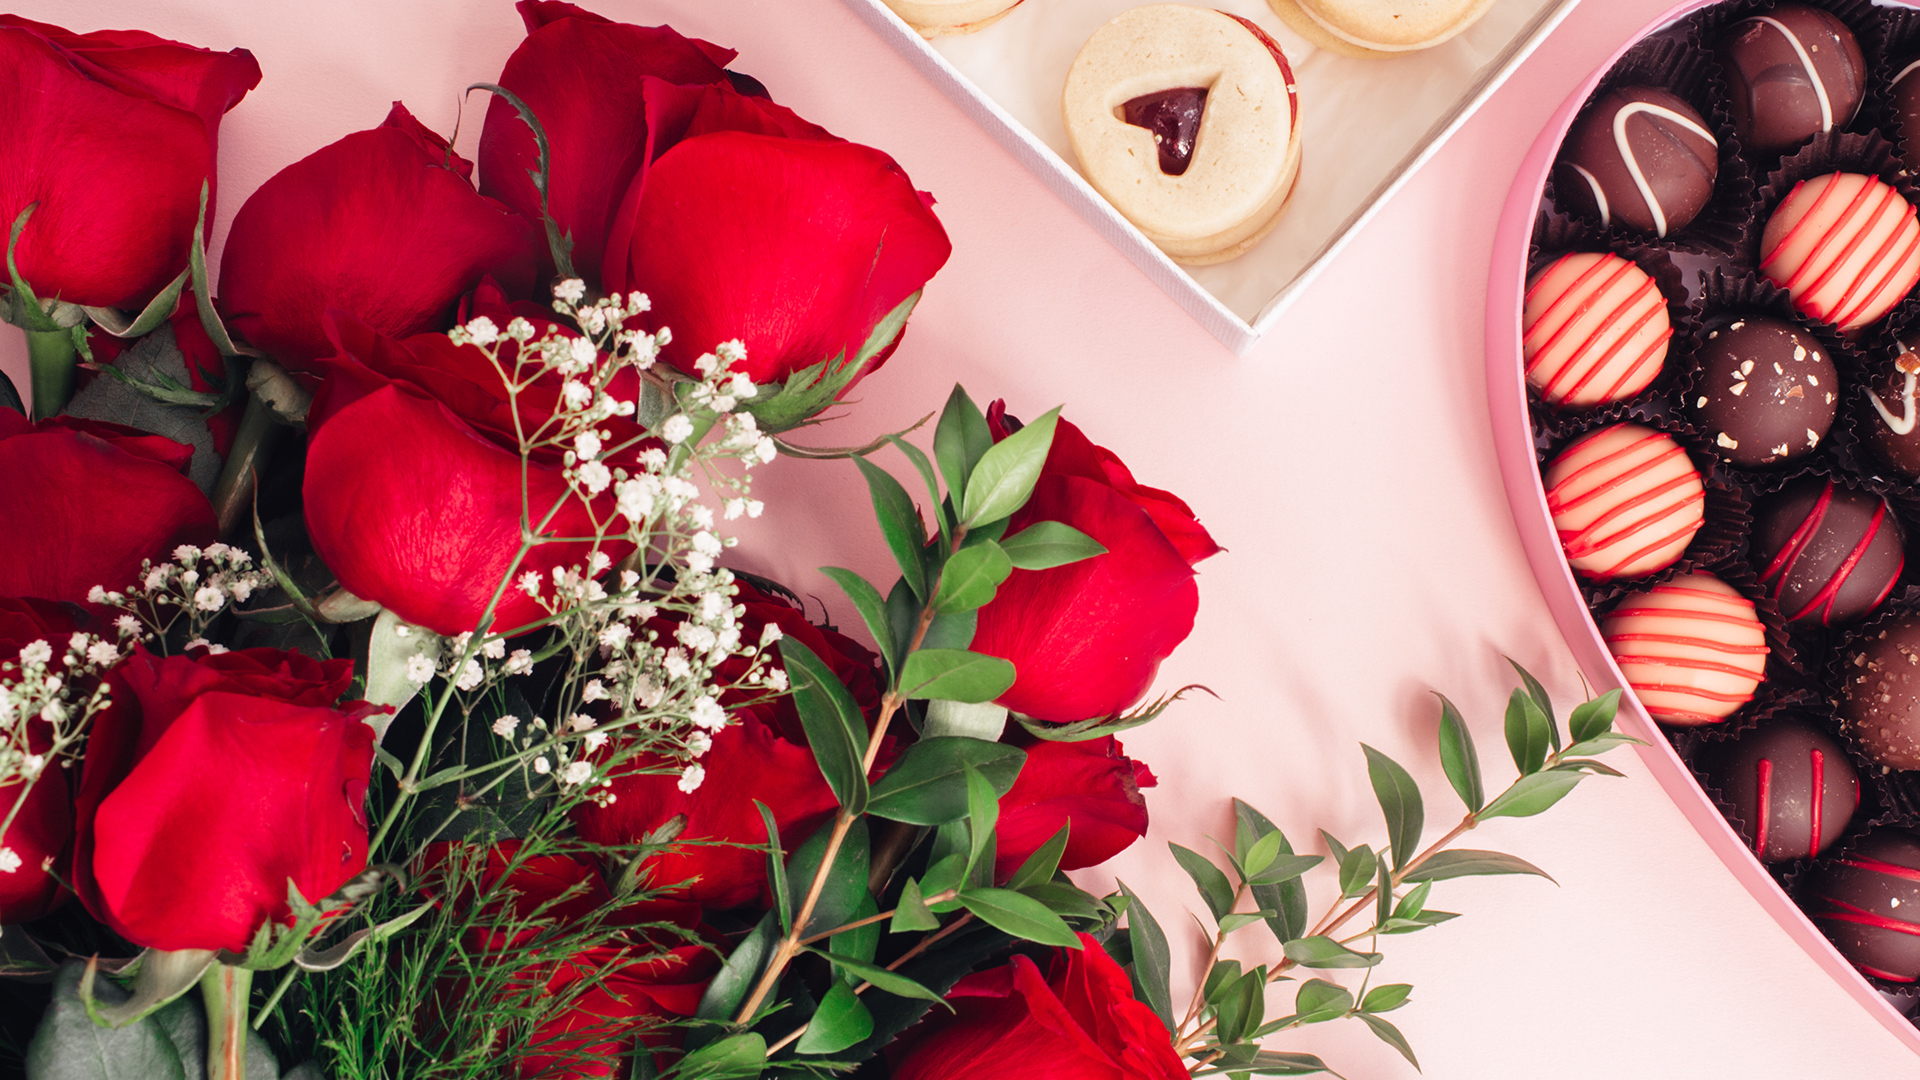 ### Roses and Cookies ###